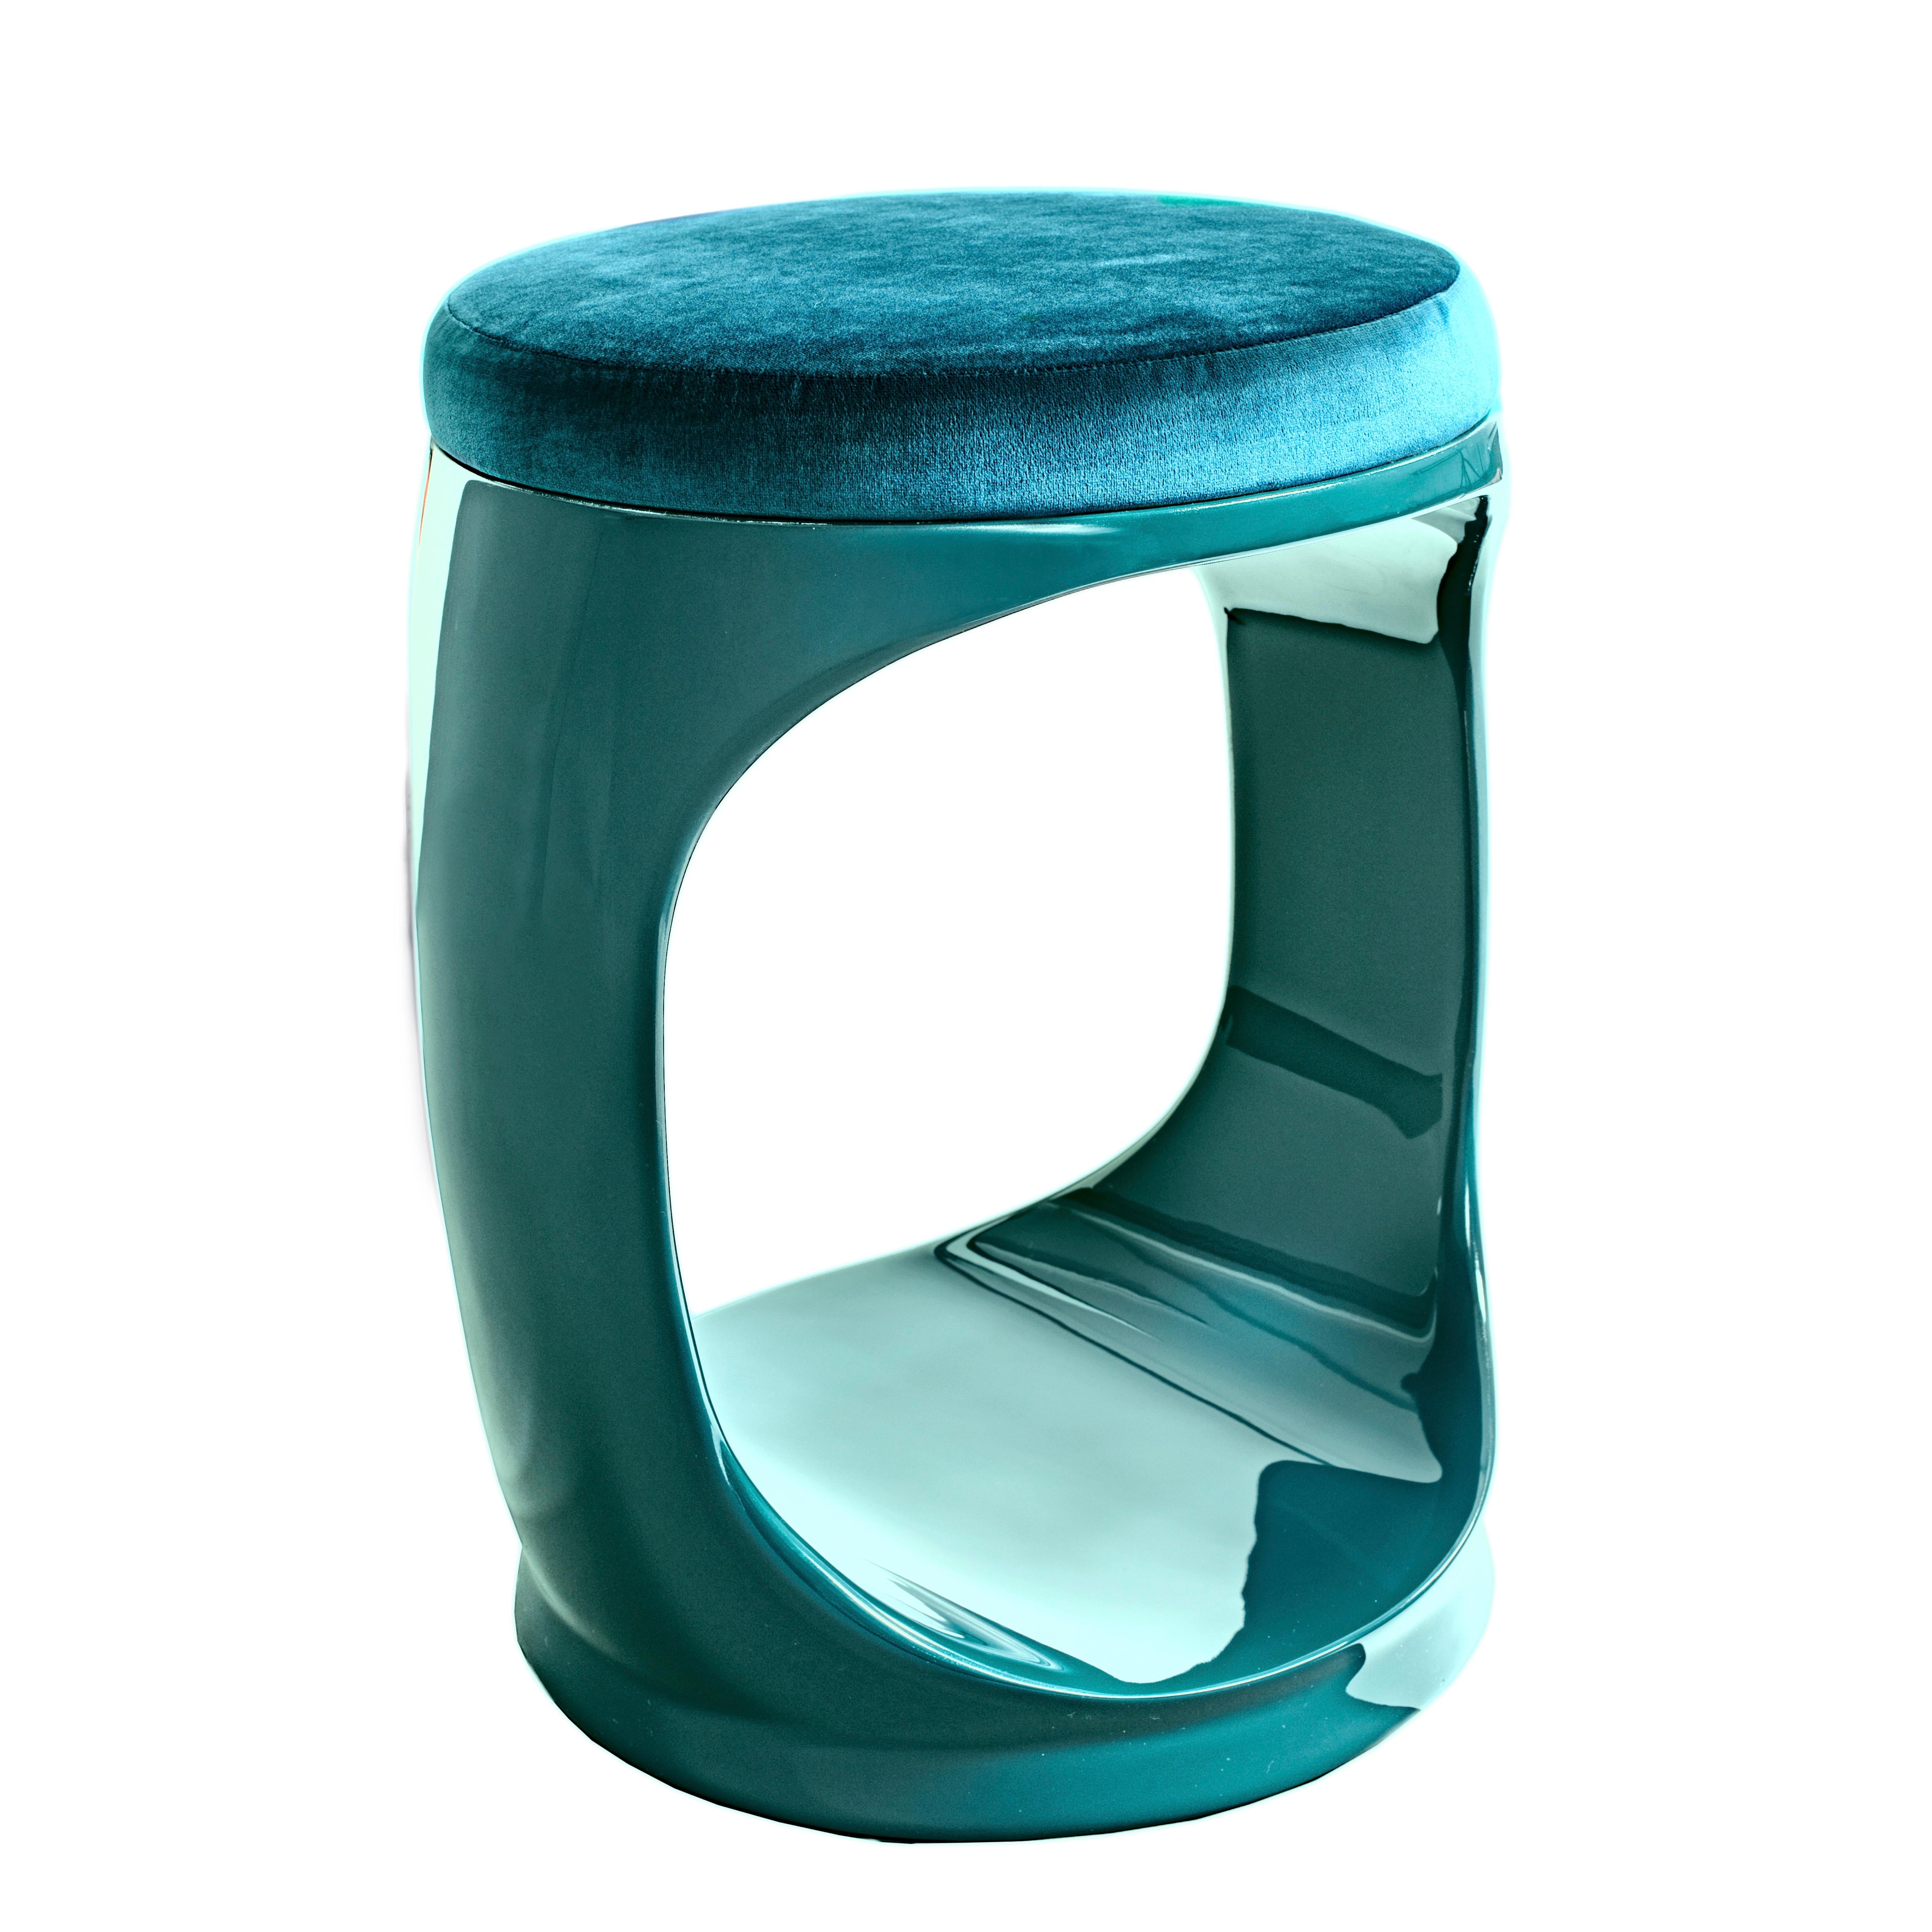 Contemporary Pouf by Cyril Rumpler Signet Ring, Hocker, Stool, turquoise.
These stools are available in a dozen colors and in a glossy finish. The black, white, navy blue, pink, red, turquoise, lilac, brown, green, and grey stools are available